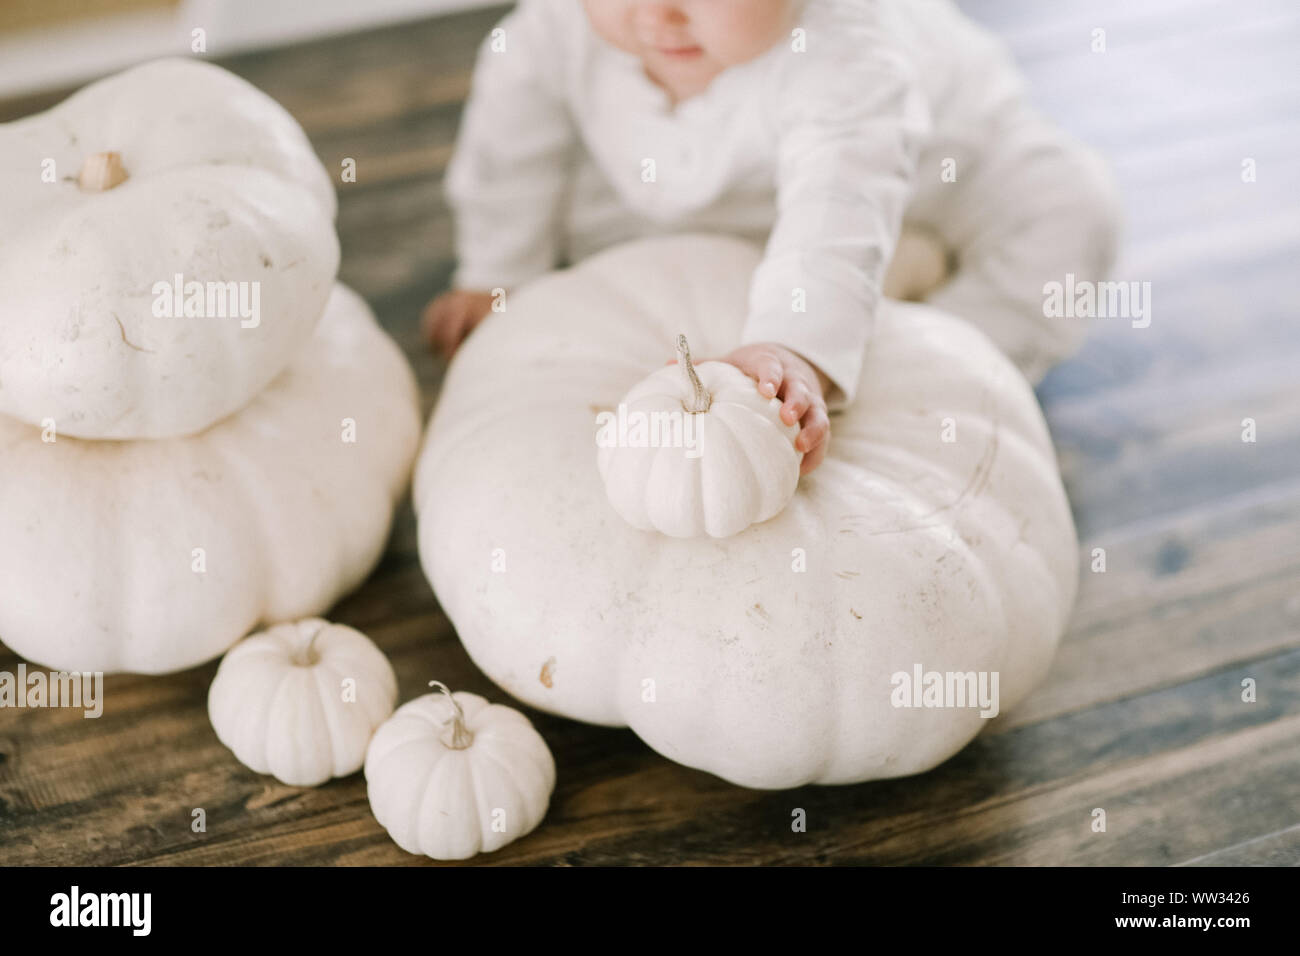 White Pumpkins Being Held By Baby Stock Photo